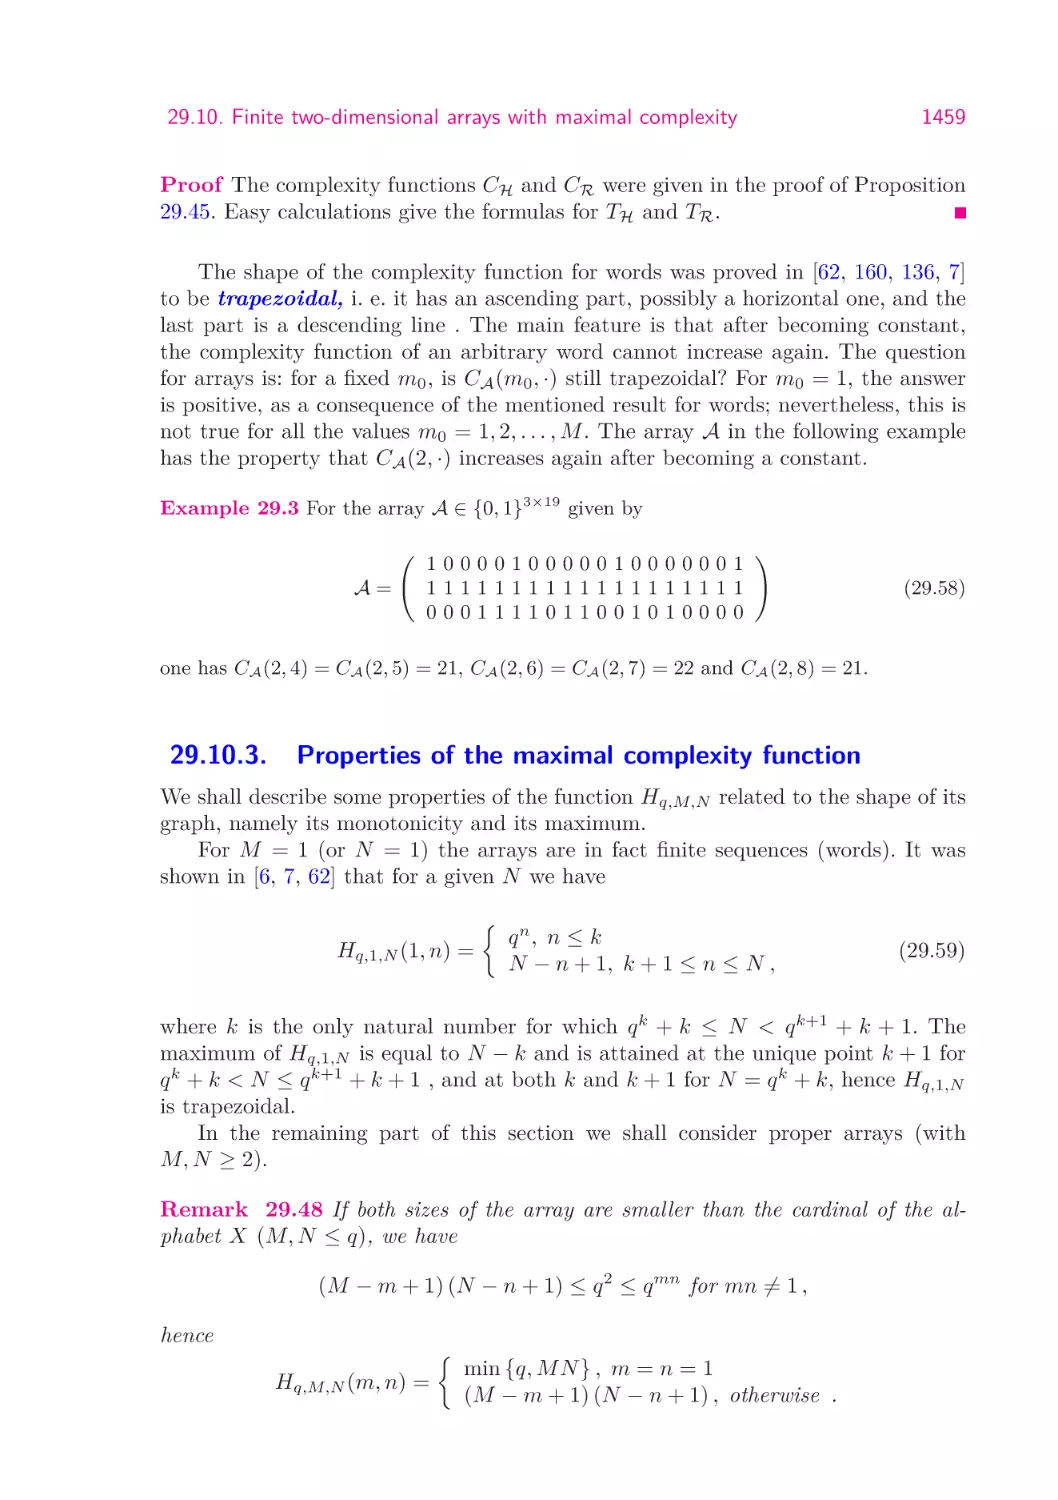 29.10.3.   Properties of the maximal complexity function